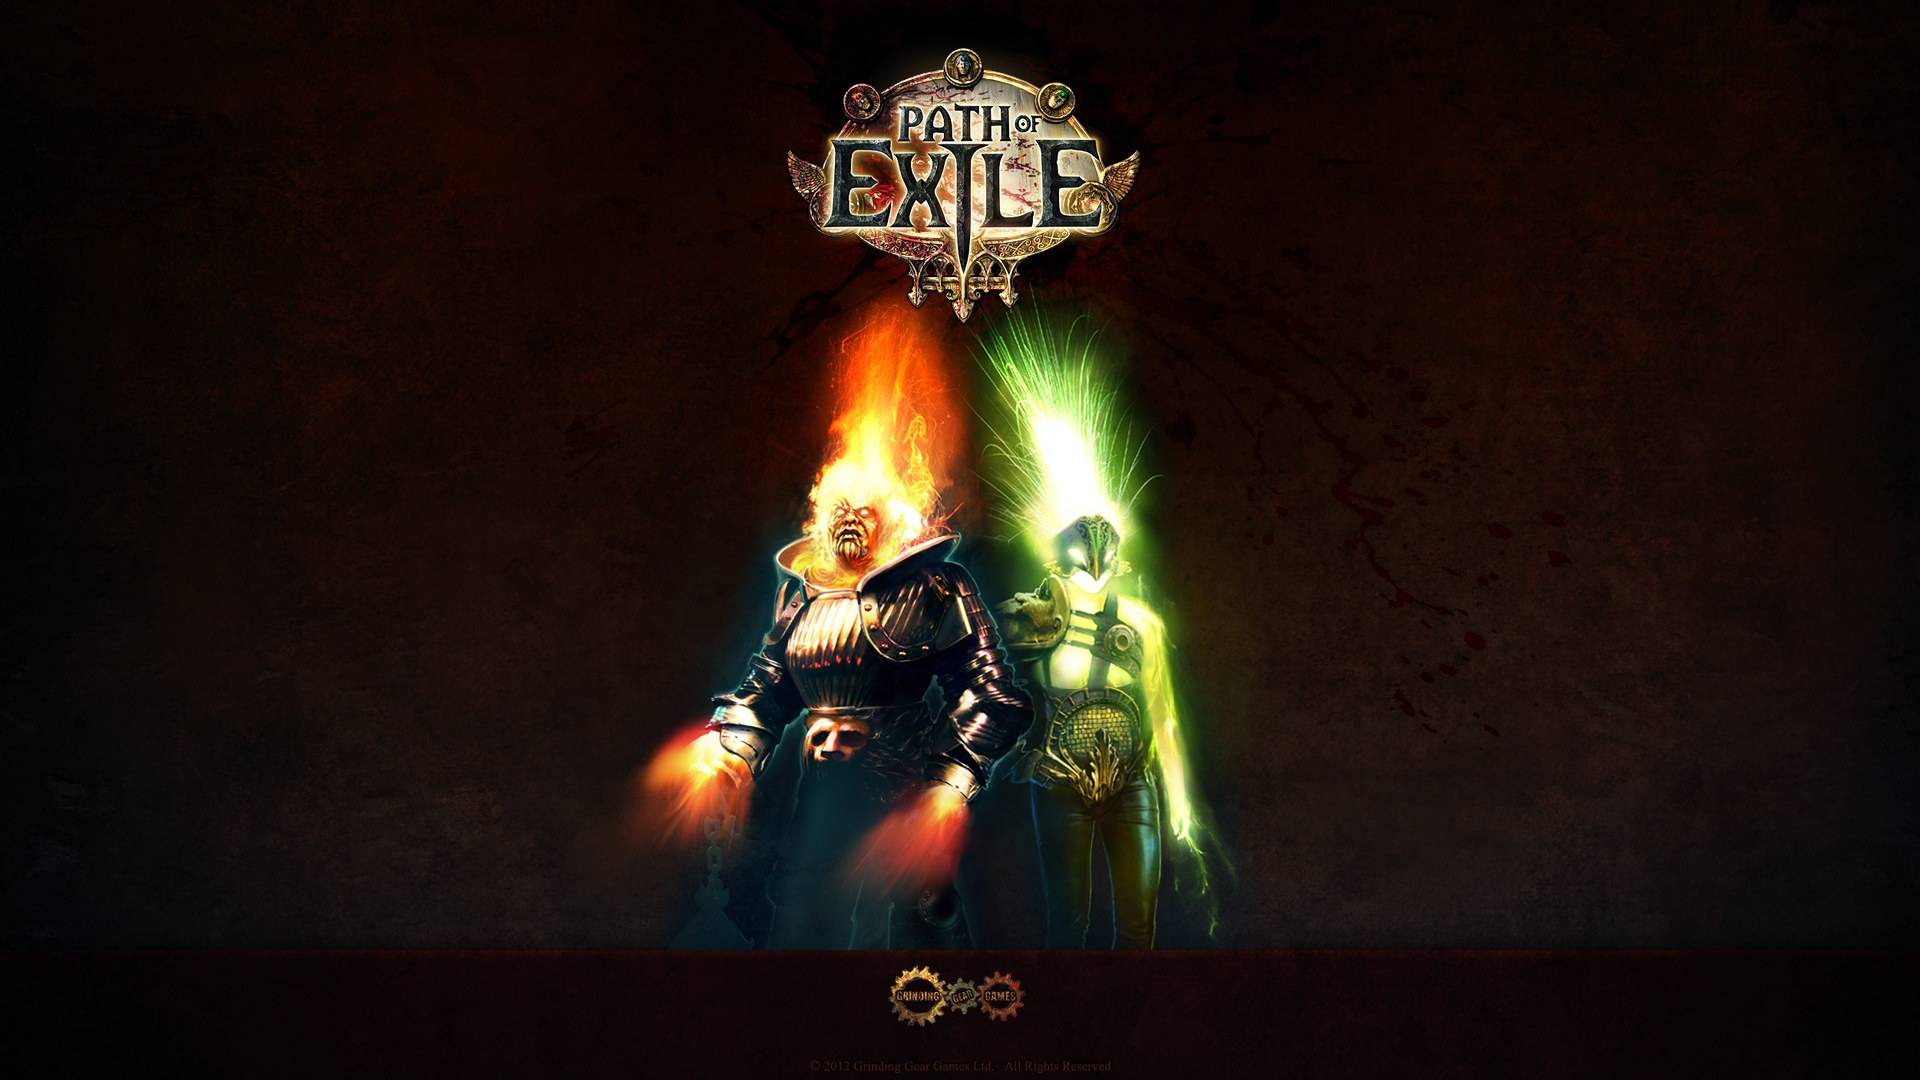 1920x1080 Path of Exile Wallpapers here on and all the updates